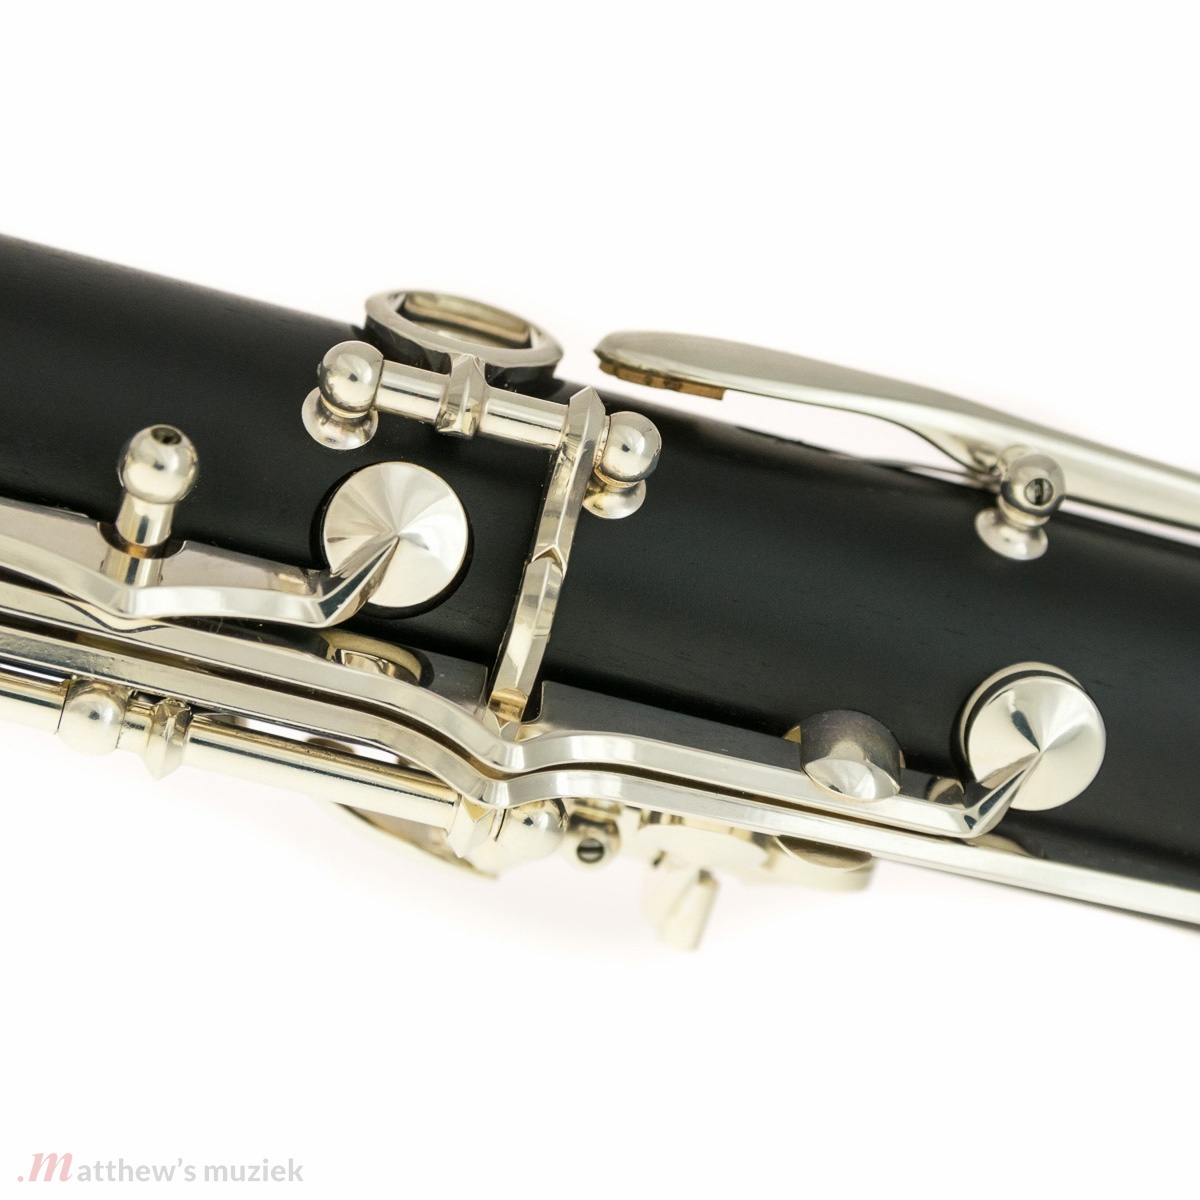 Buffet Crampon Bb Clarinet - E11 with Silver Plated Keys